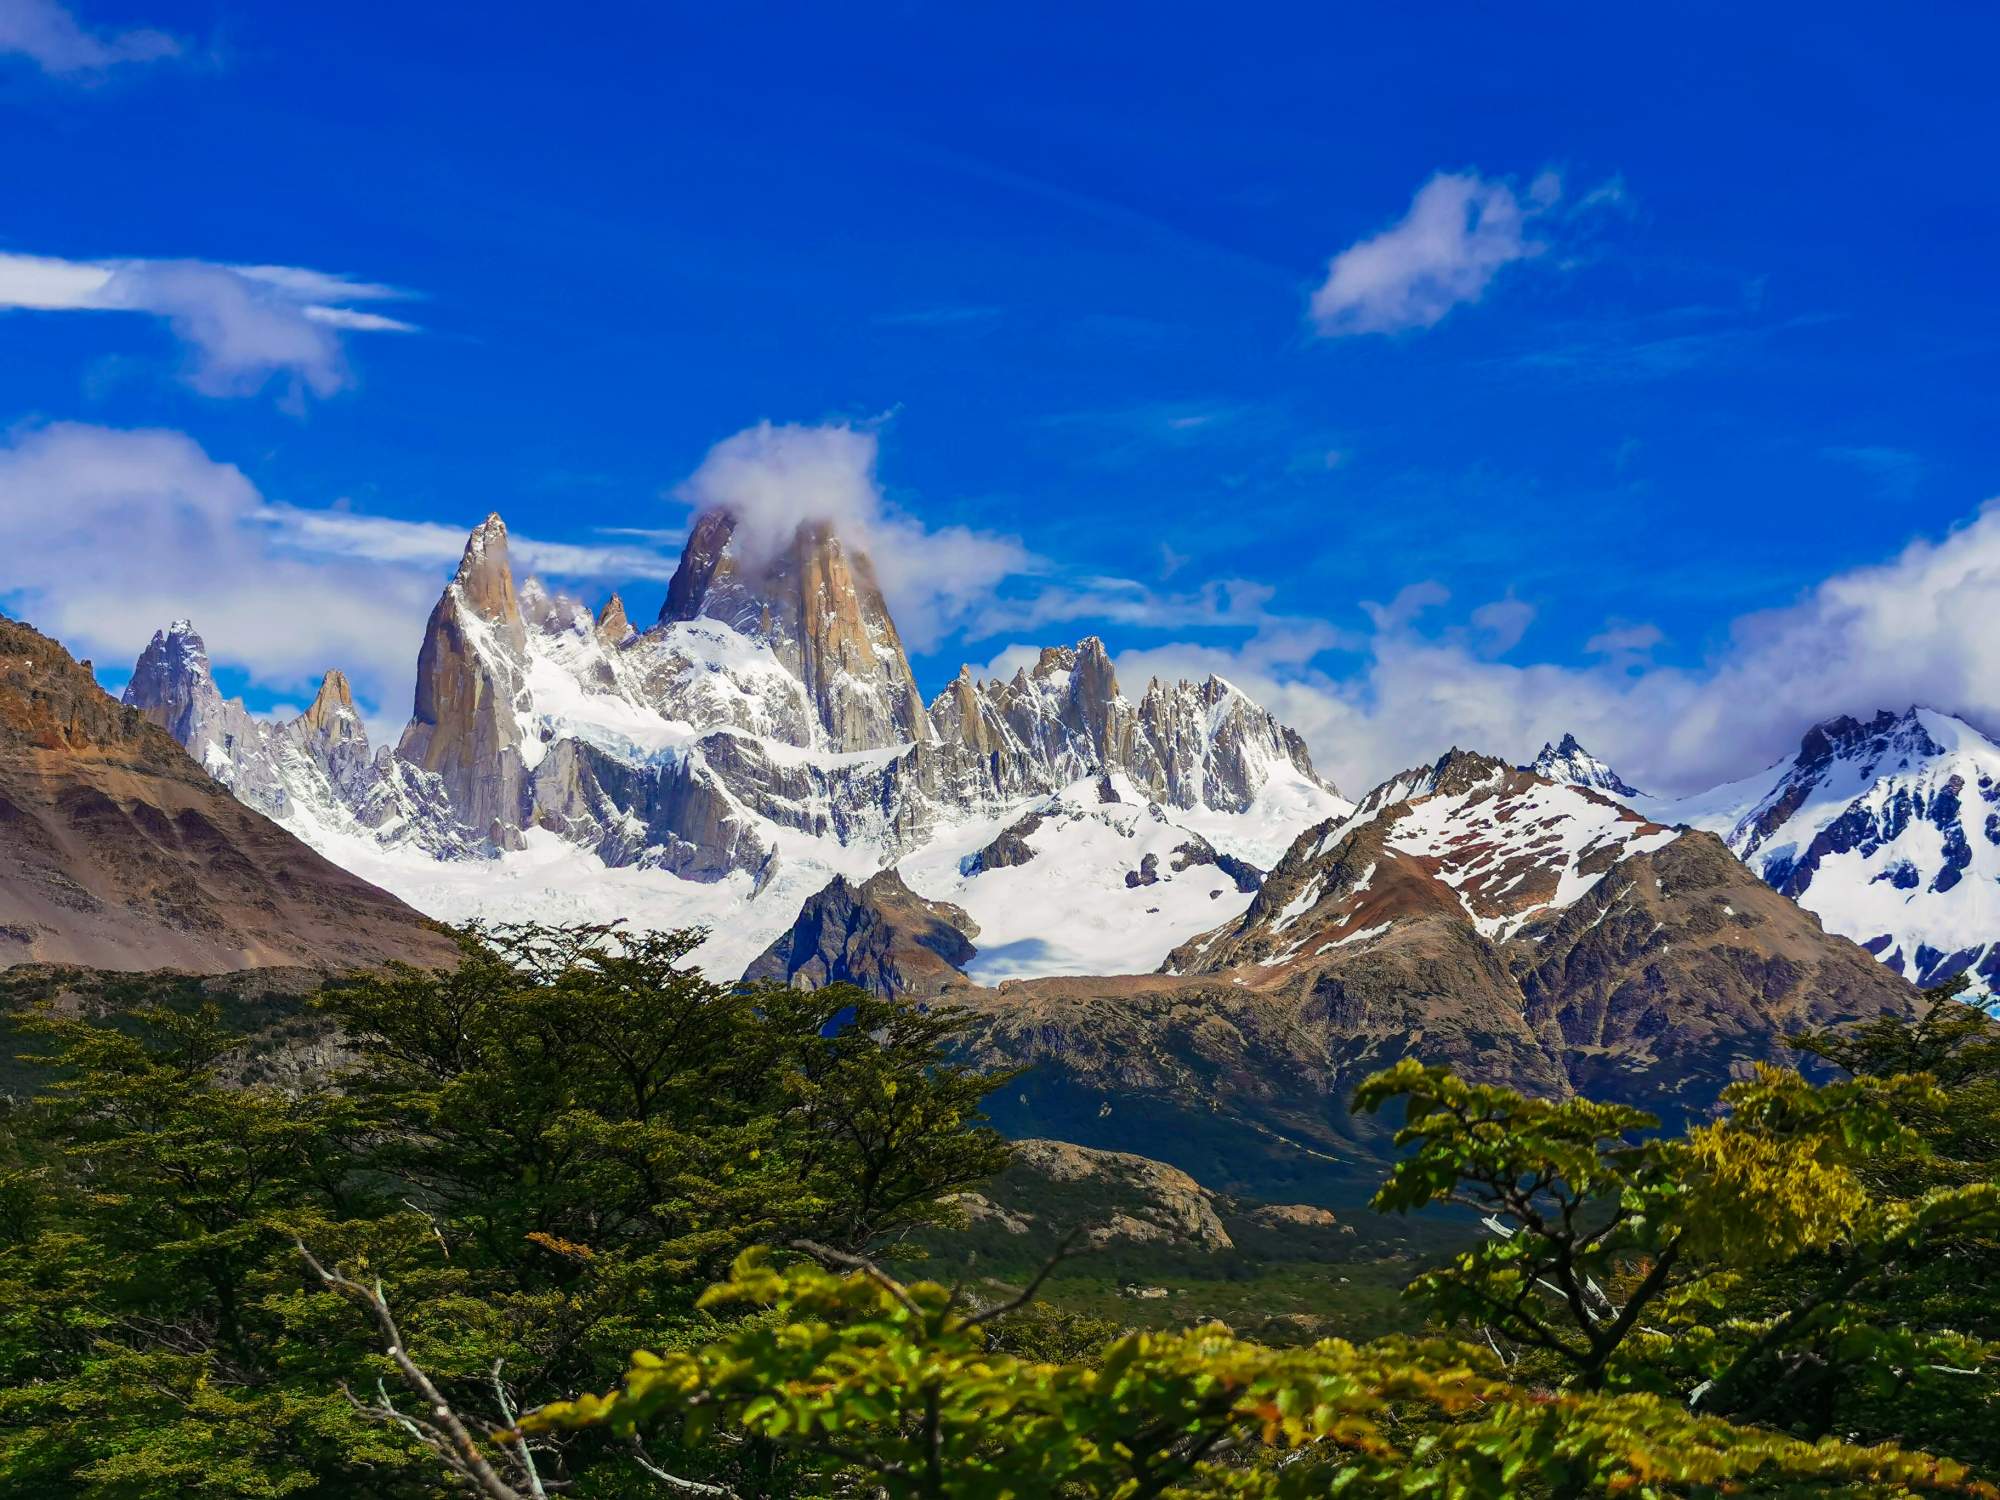 View of Fitz Roy in Argentina